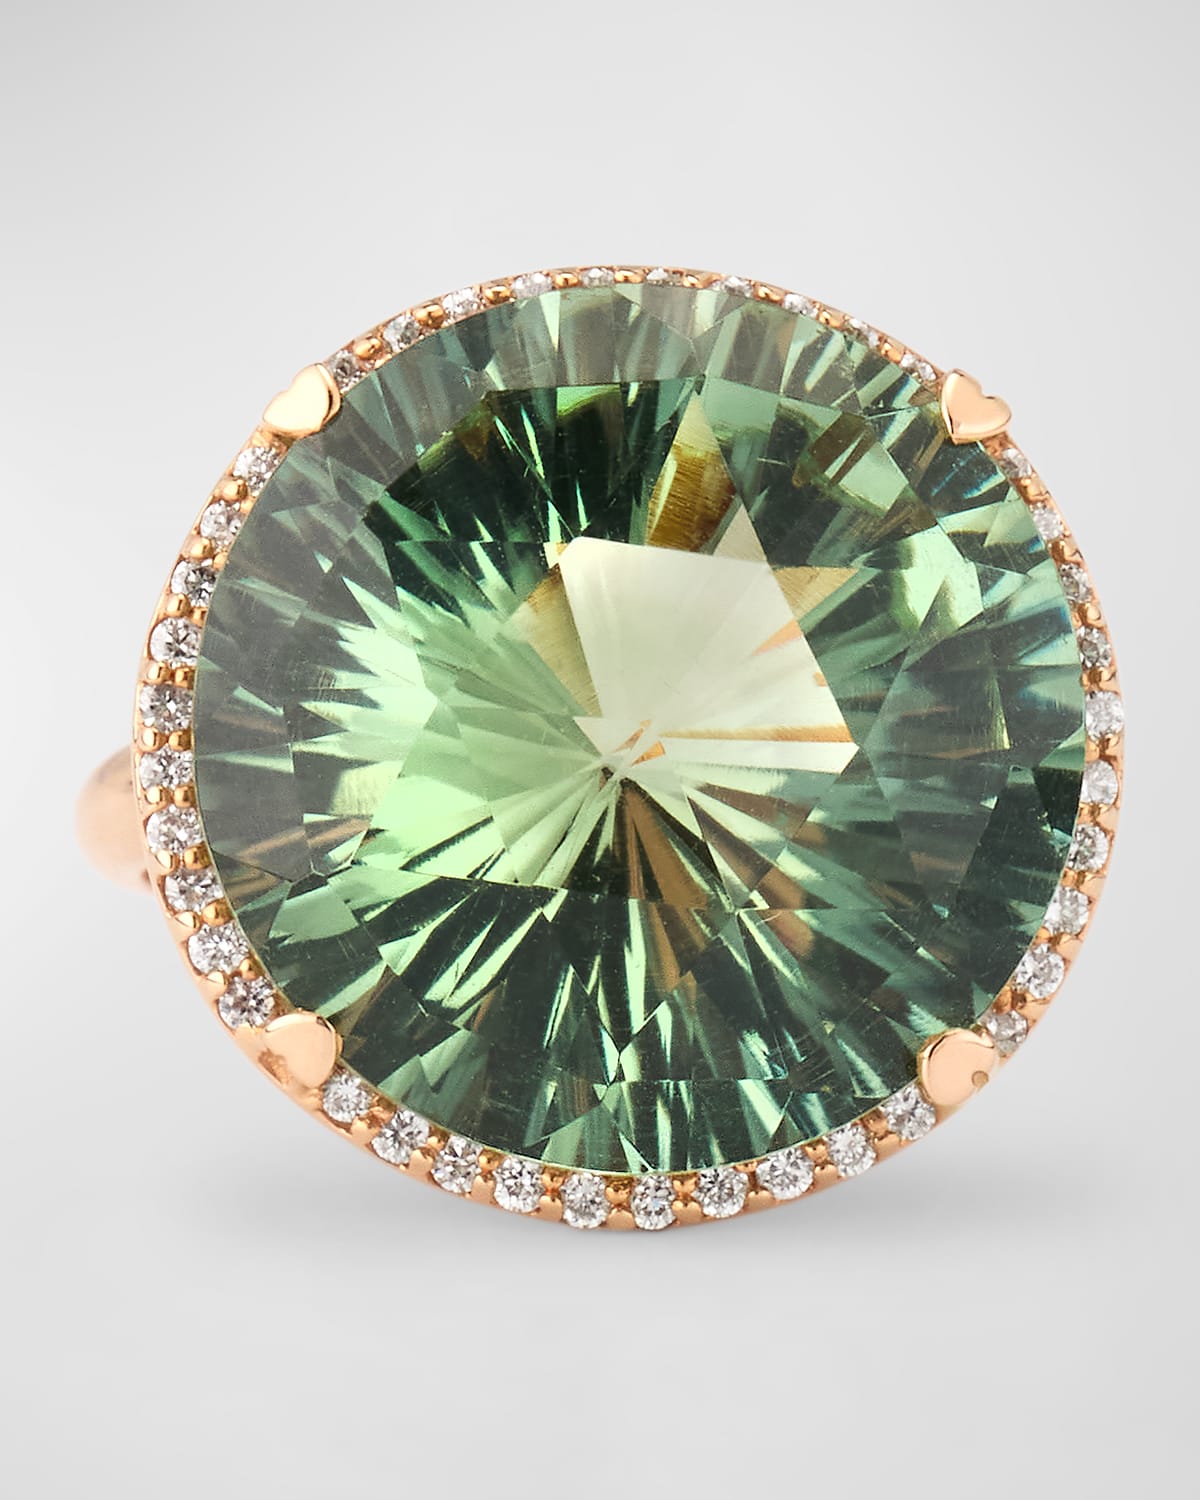 18K Rose Gold Ring with Green Quartz and Diamonds, Size 6